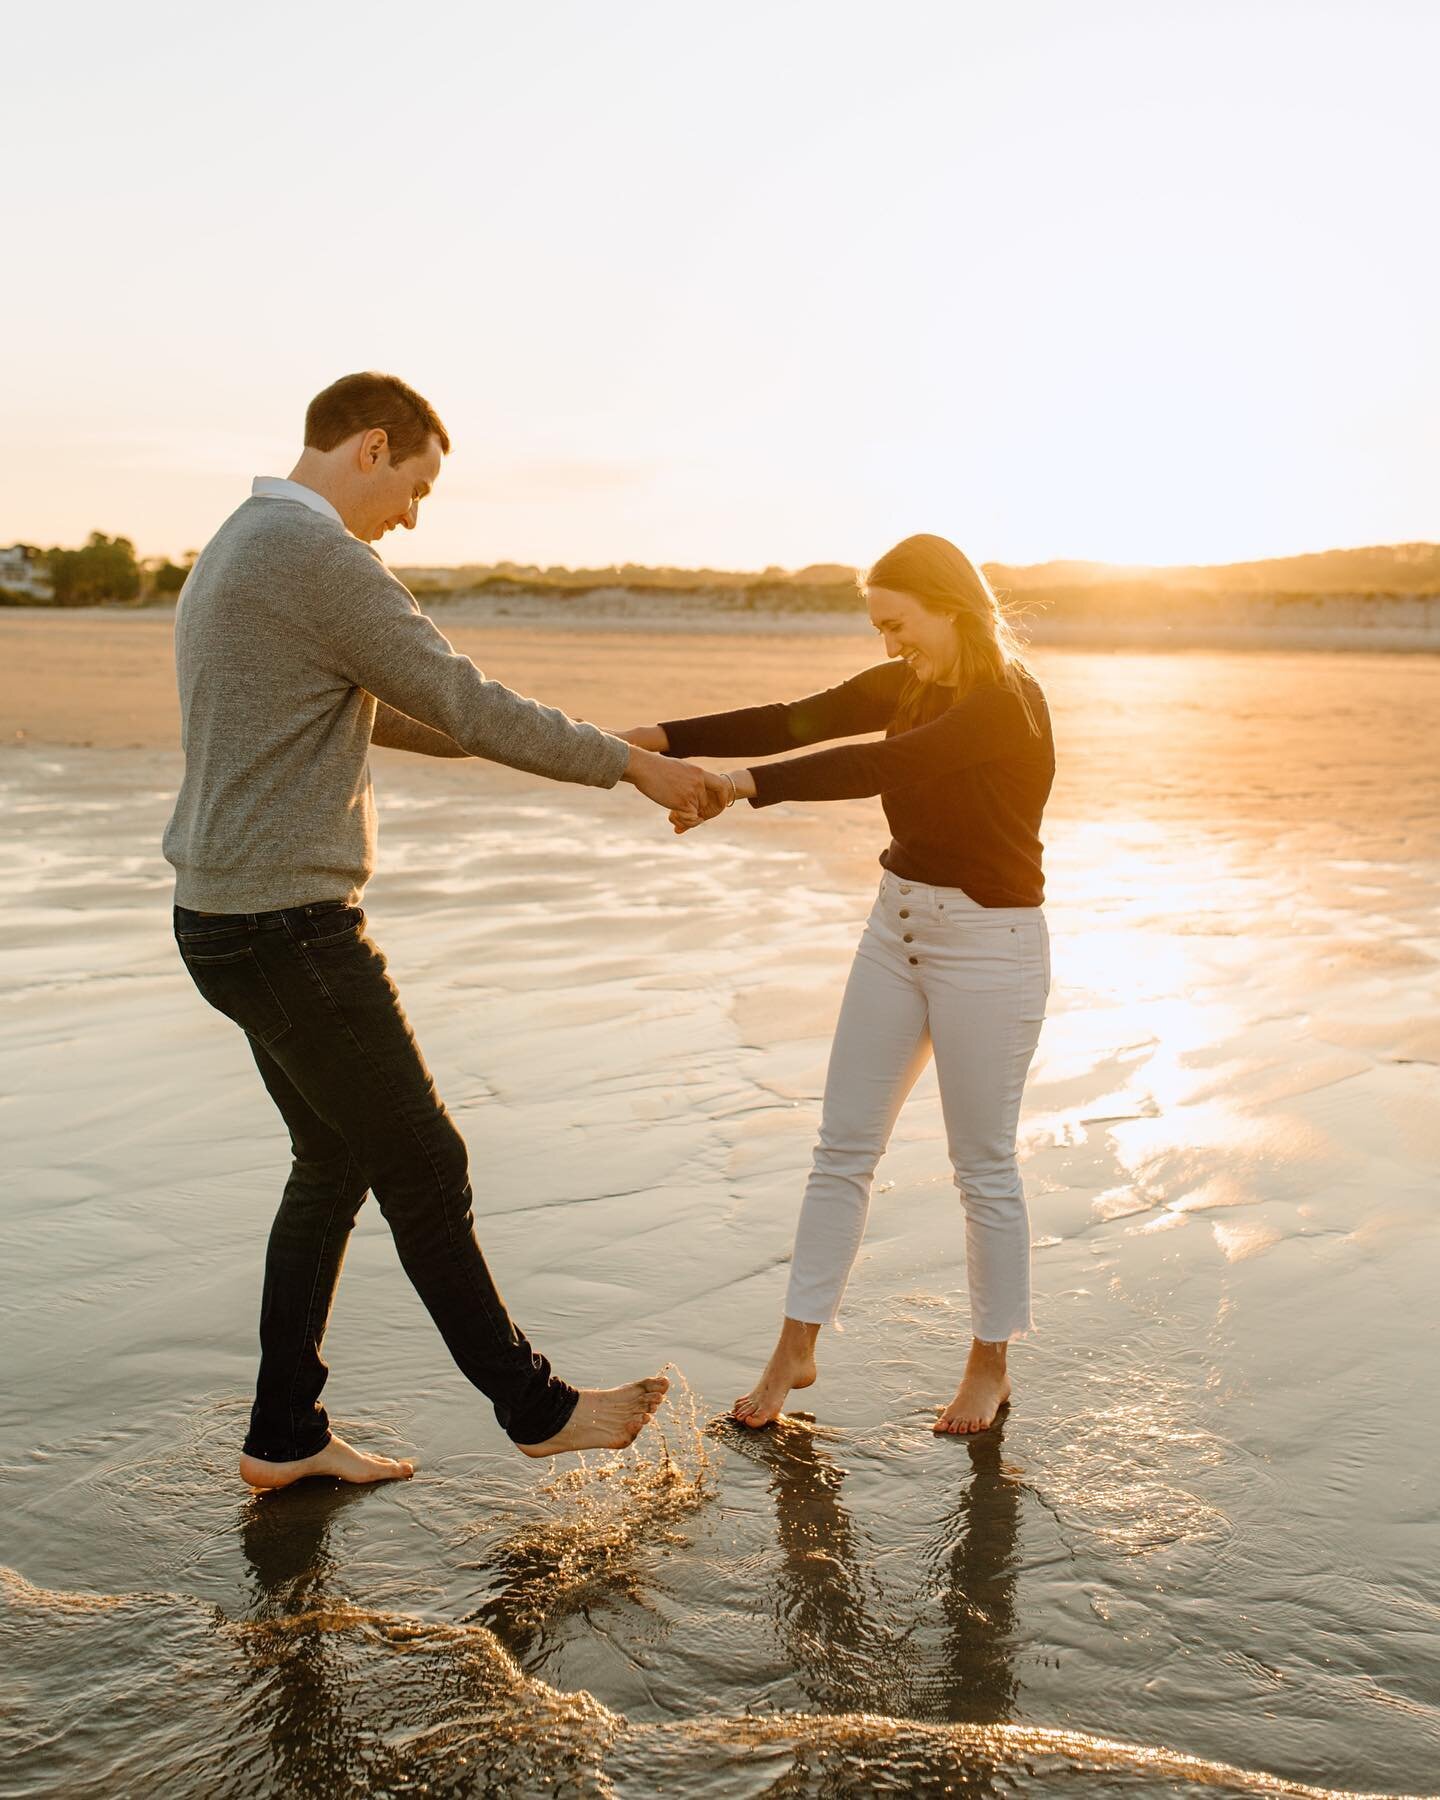 There's nothing quite like those classic New England beach sunsets 😍🤤
⠀⠀⠀⠀⠀⠀⠀⠀⠀
This engagement session was one for the BOOKS y'all. C+J are two of the most genuinely kind and down to earth humans and I absolutely loved getting to know them more du